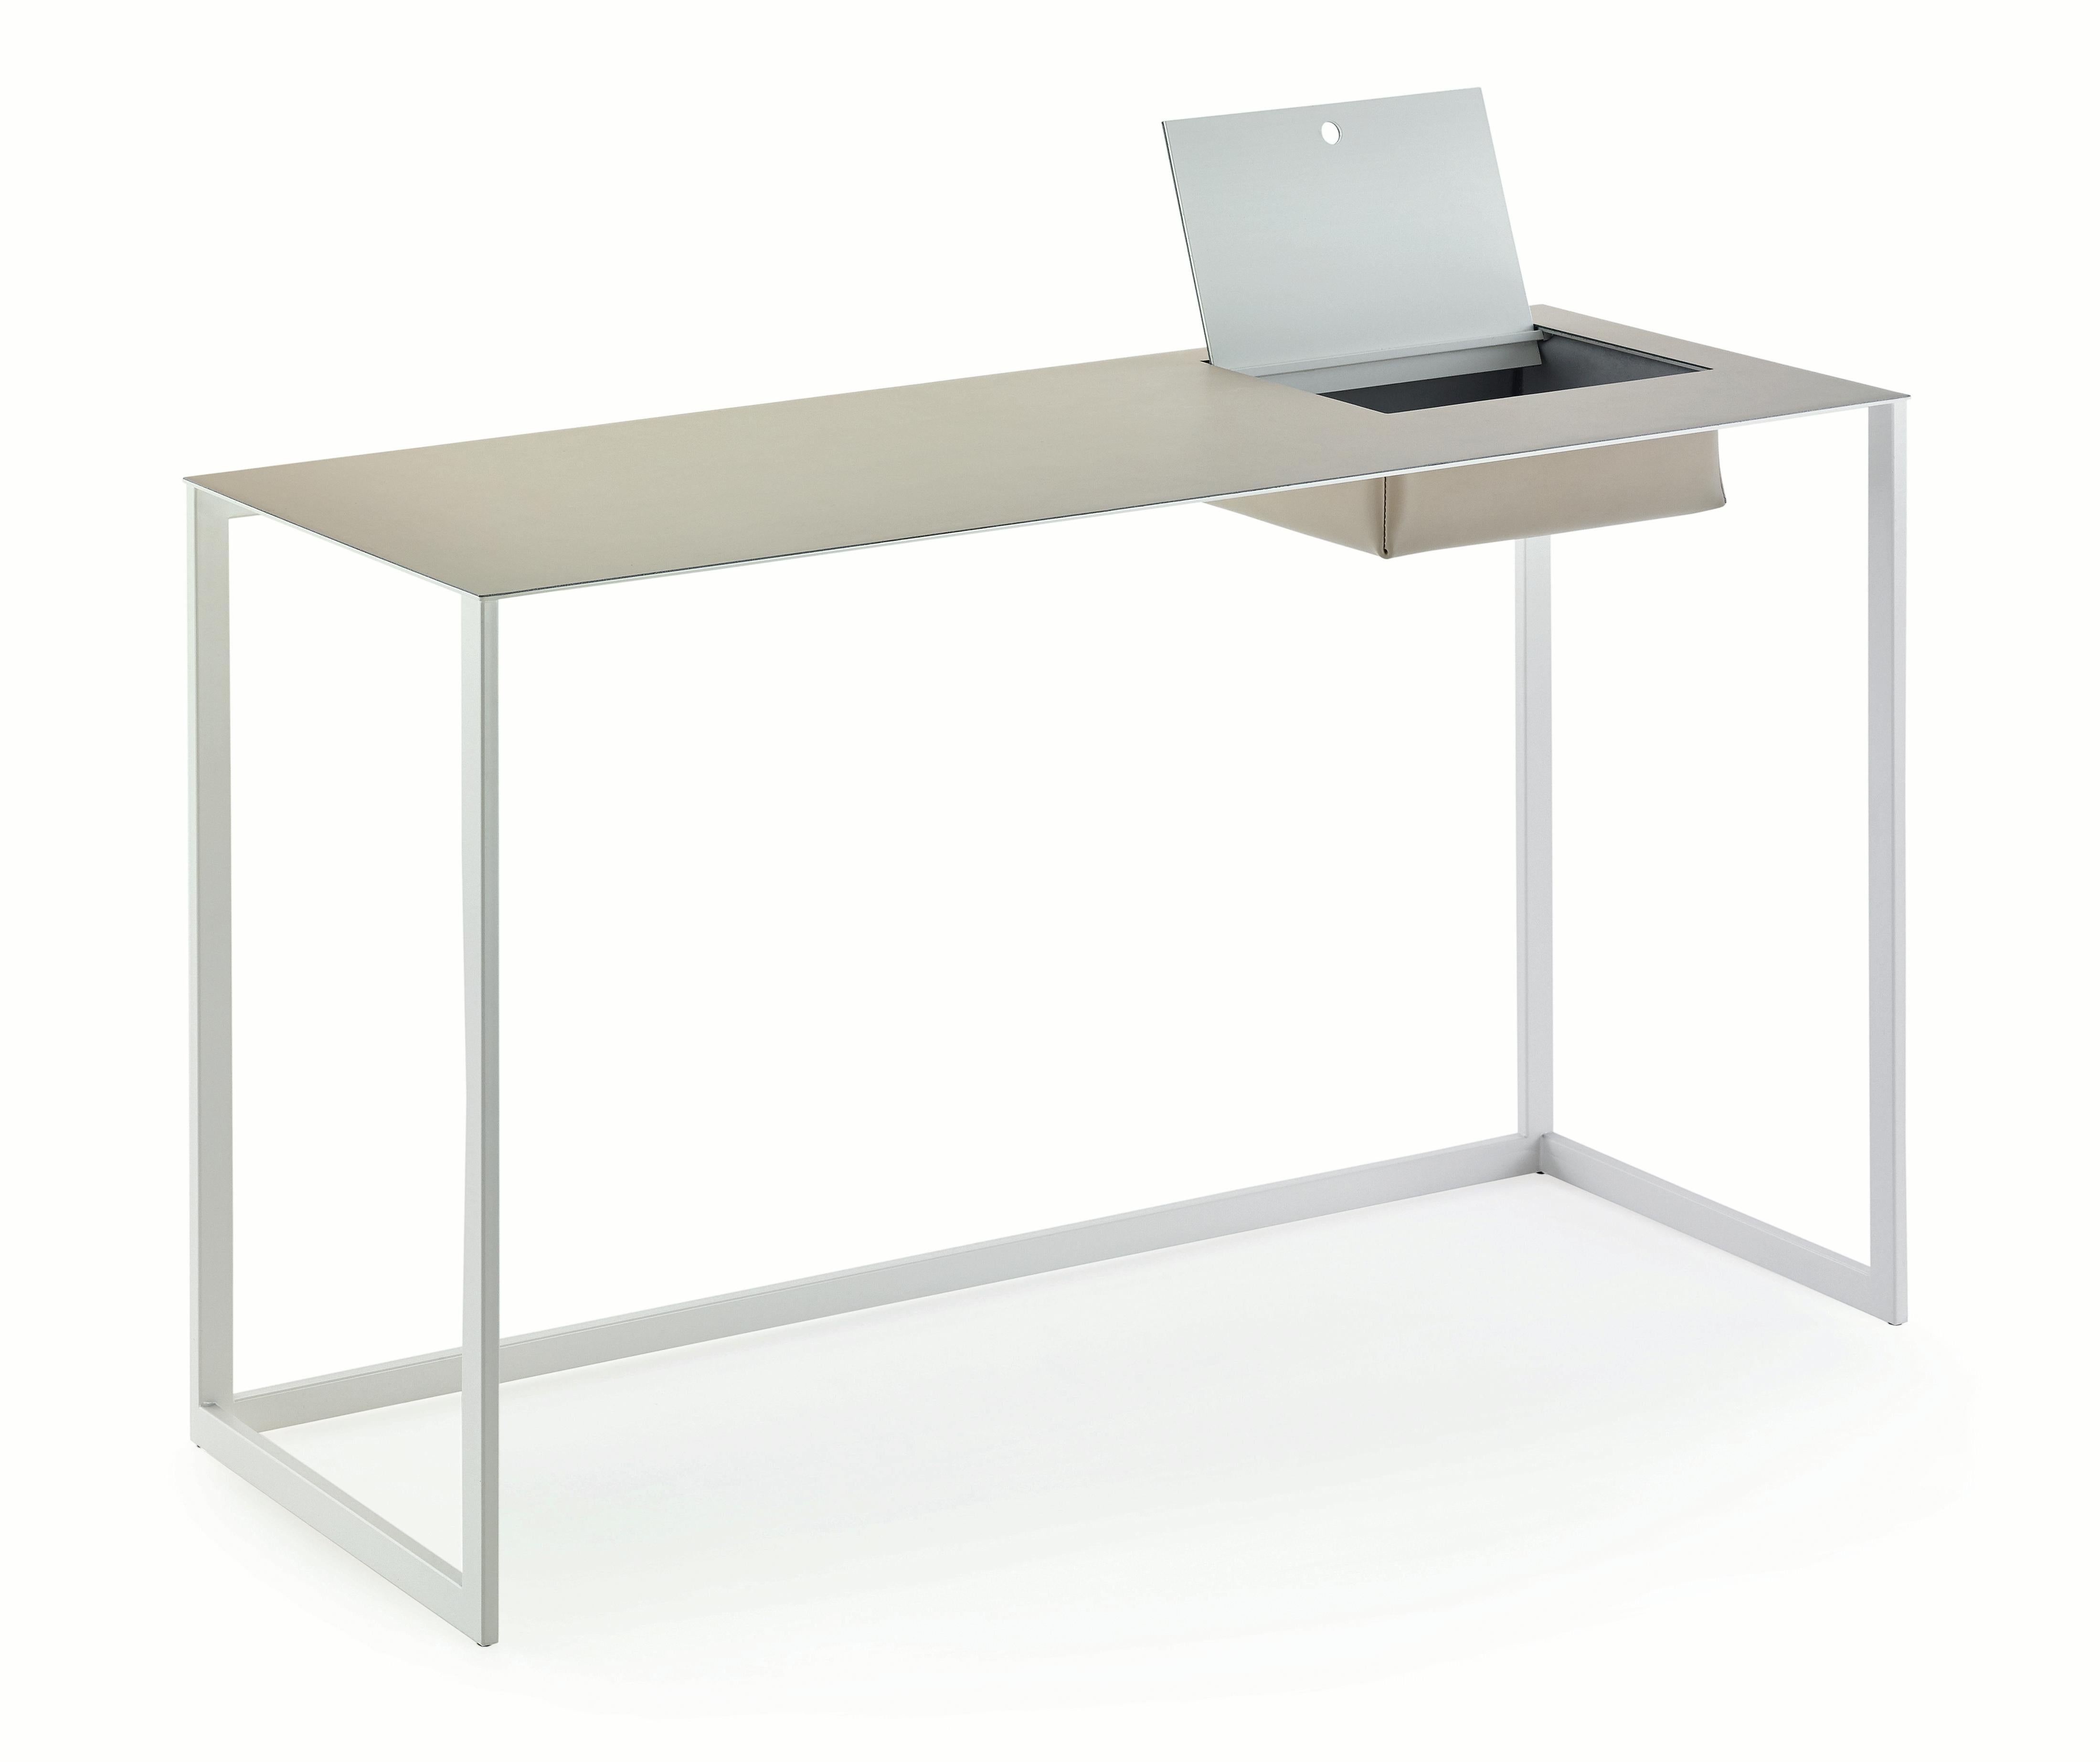 Zanotta Calamo Desk in White Top with Steel Frame by Gabriele Rosa

Varnished steel frame and top in black, white or graphite. Top and storage space in cowhide pigmentato 90. The storage space is accessed by a drop-leaf opening.

Calamo is not